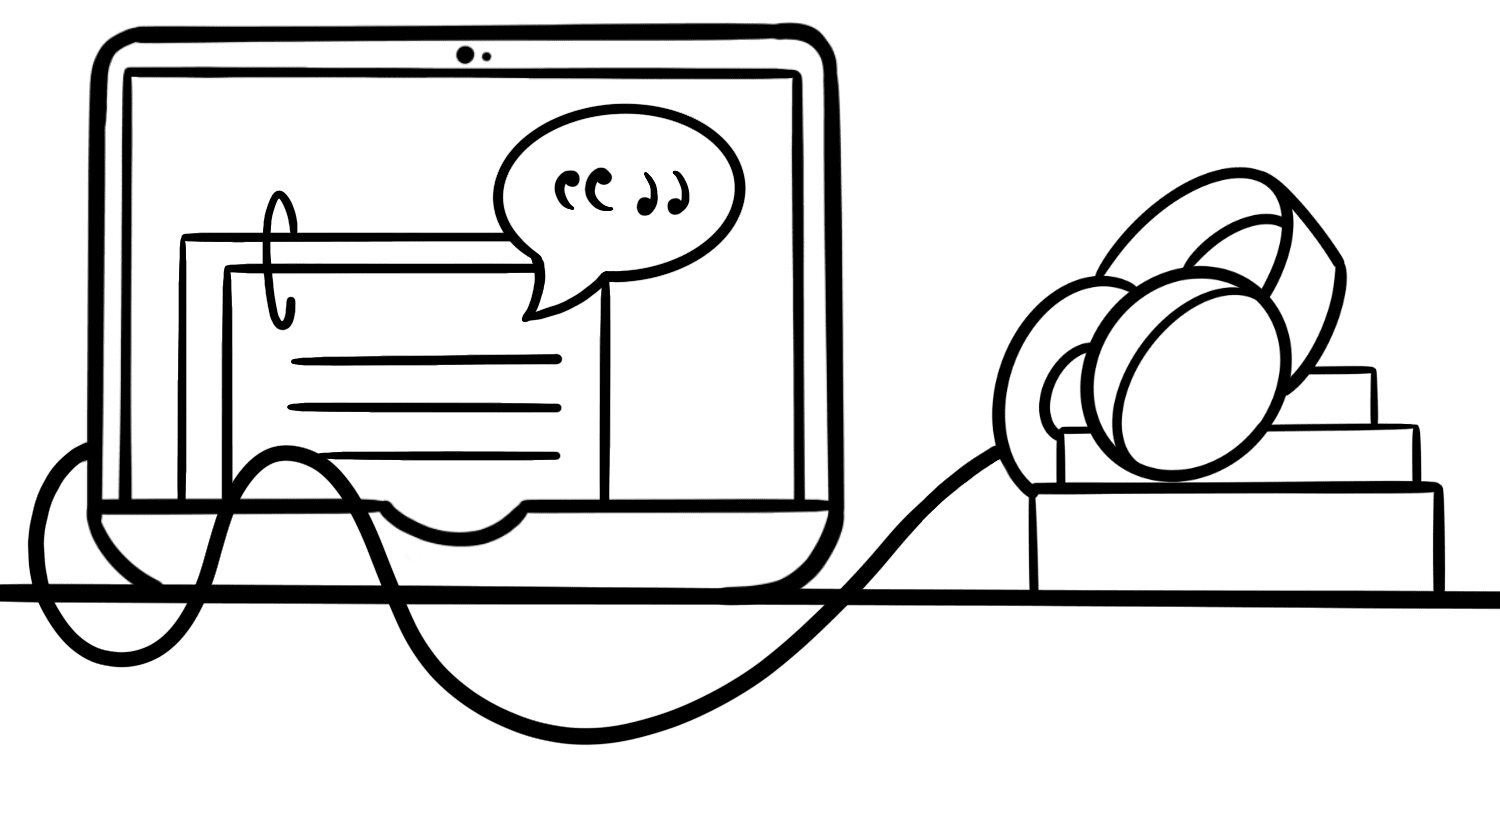 Illustration: A laptop sits on a table, connected to headphones that are resting on a stack of books. The screen displays an image of a multi-page paper document with a speech bubble, representing Text-to-Speech technology.